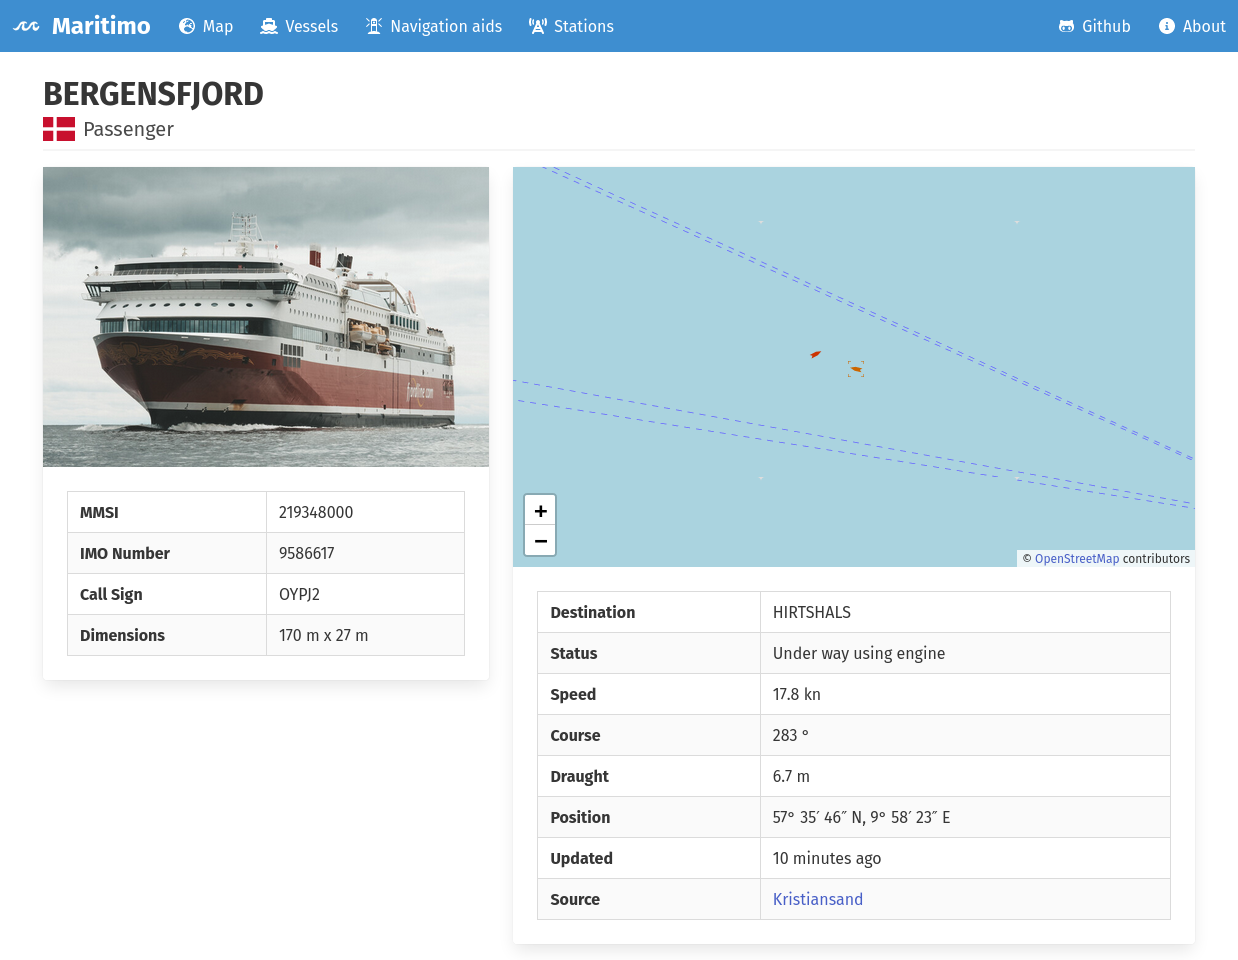 The Bergensfjord vessel's page